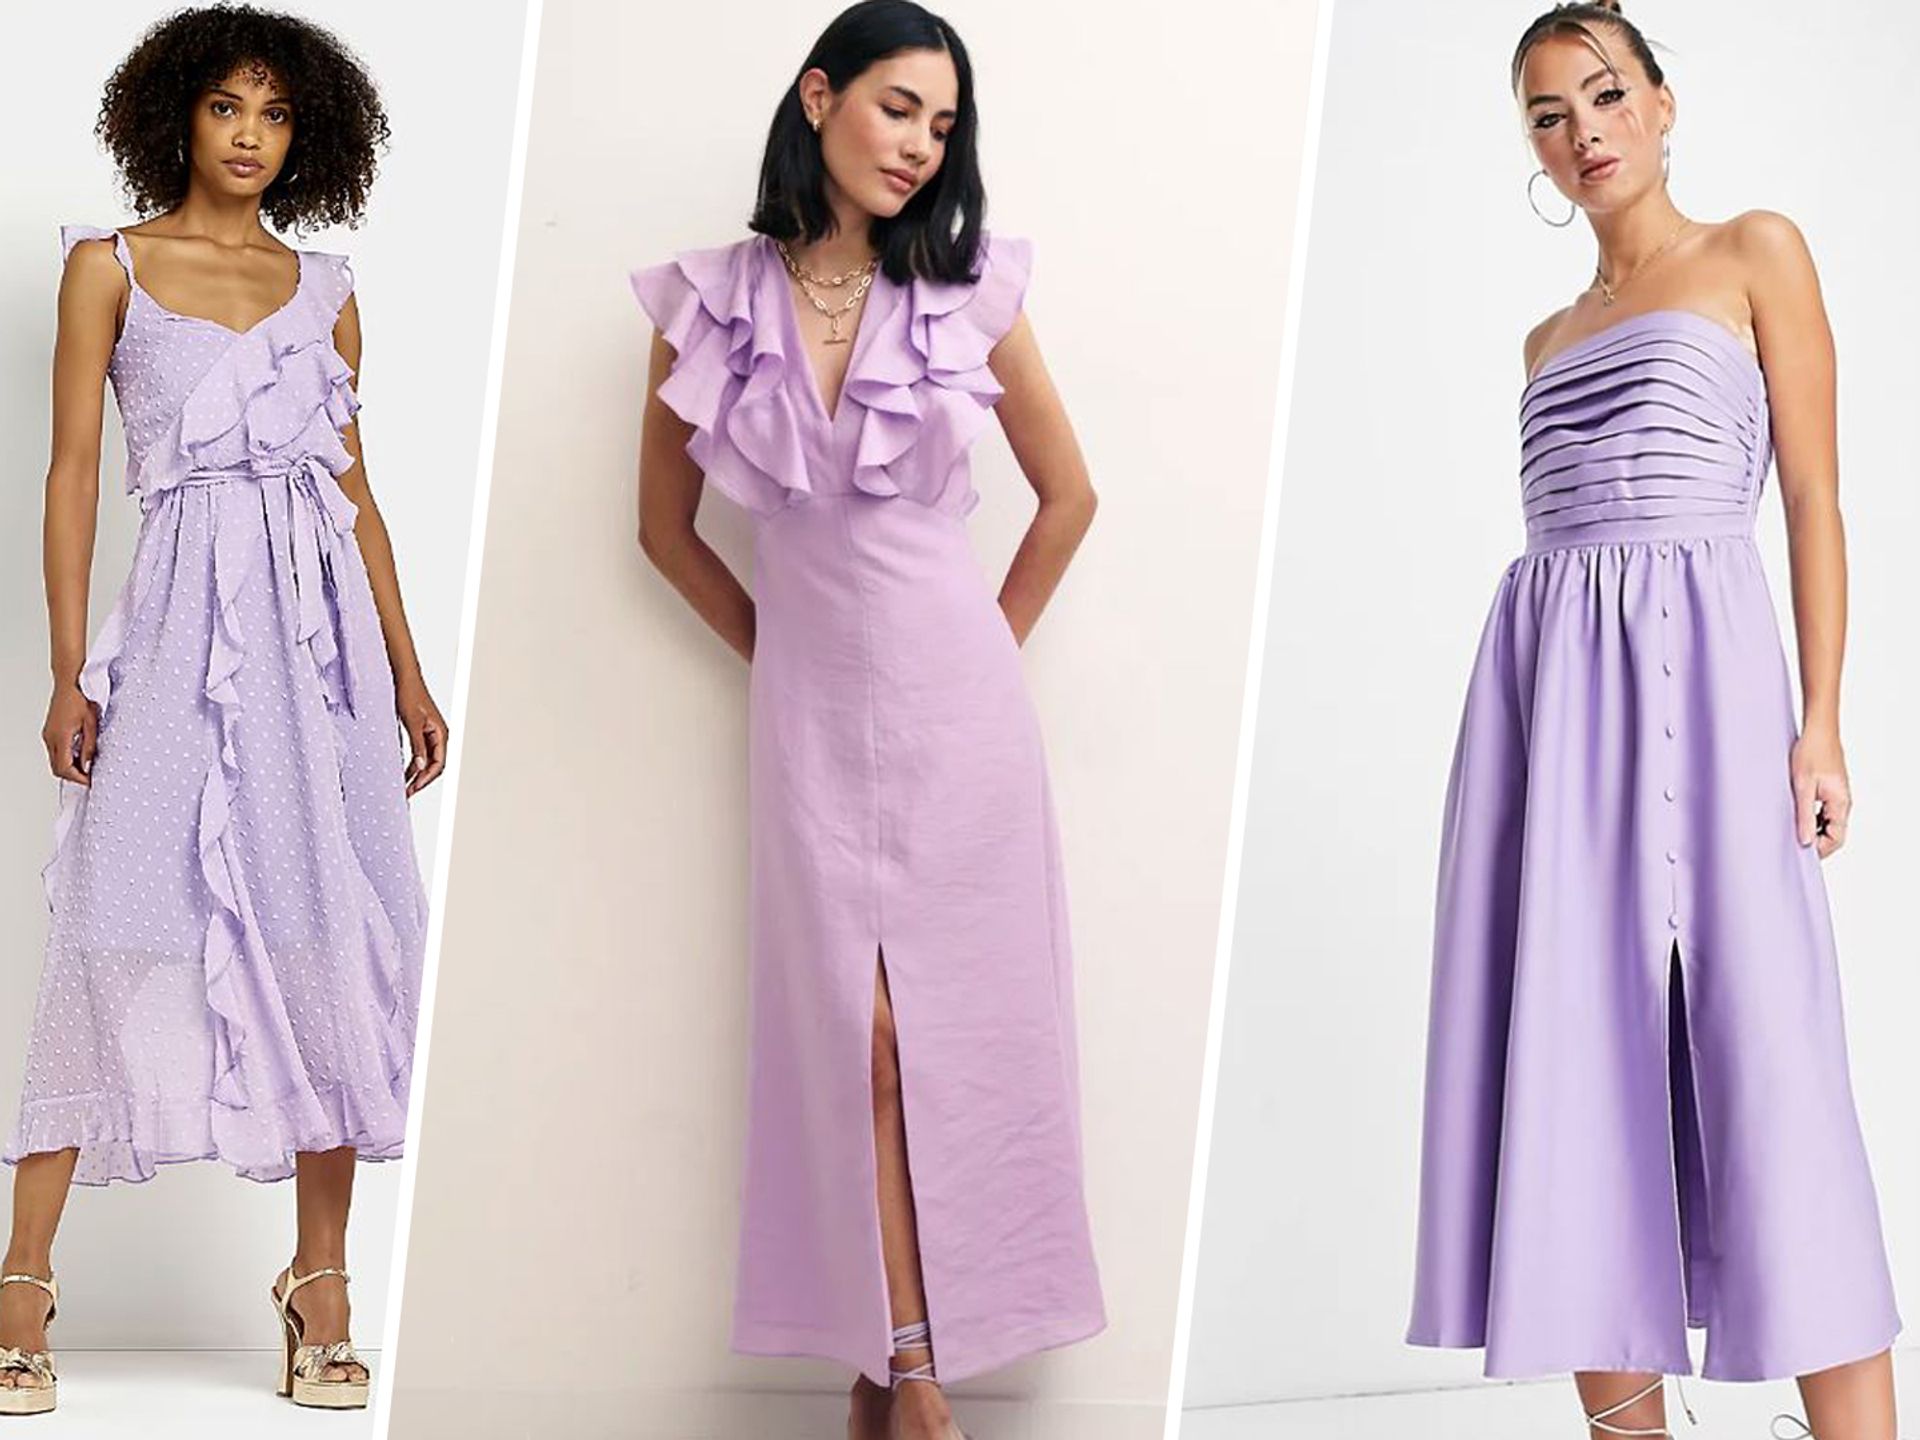 How to wear purple - purple outfits in every shade from lilac to